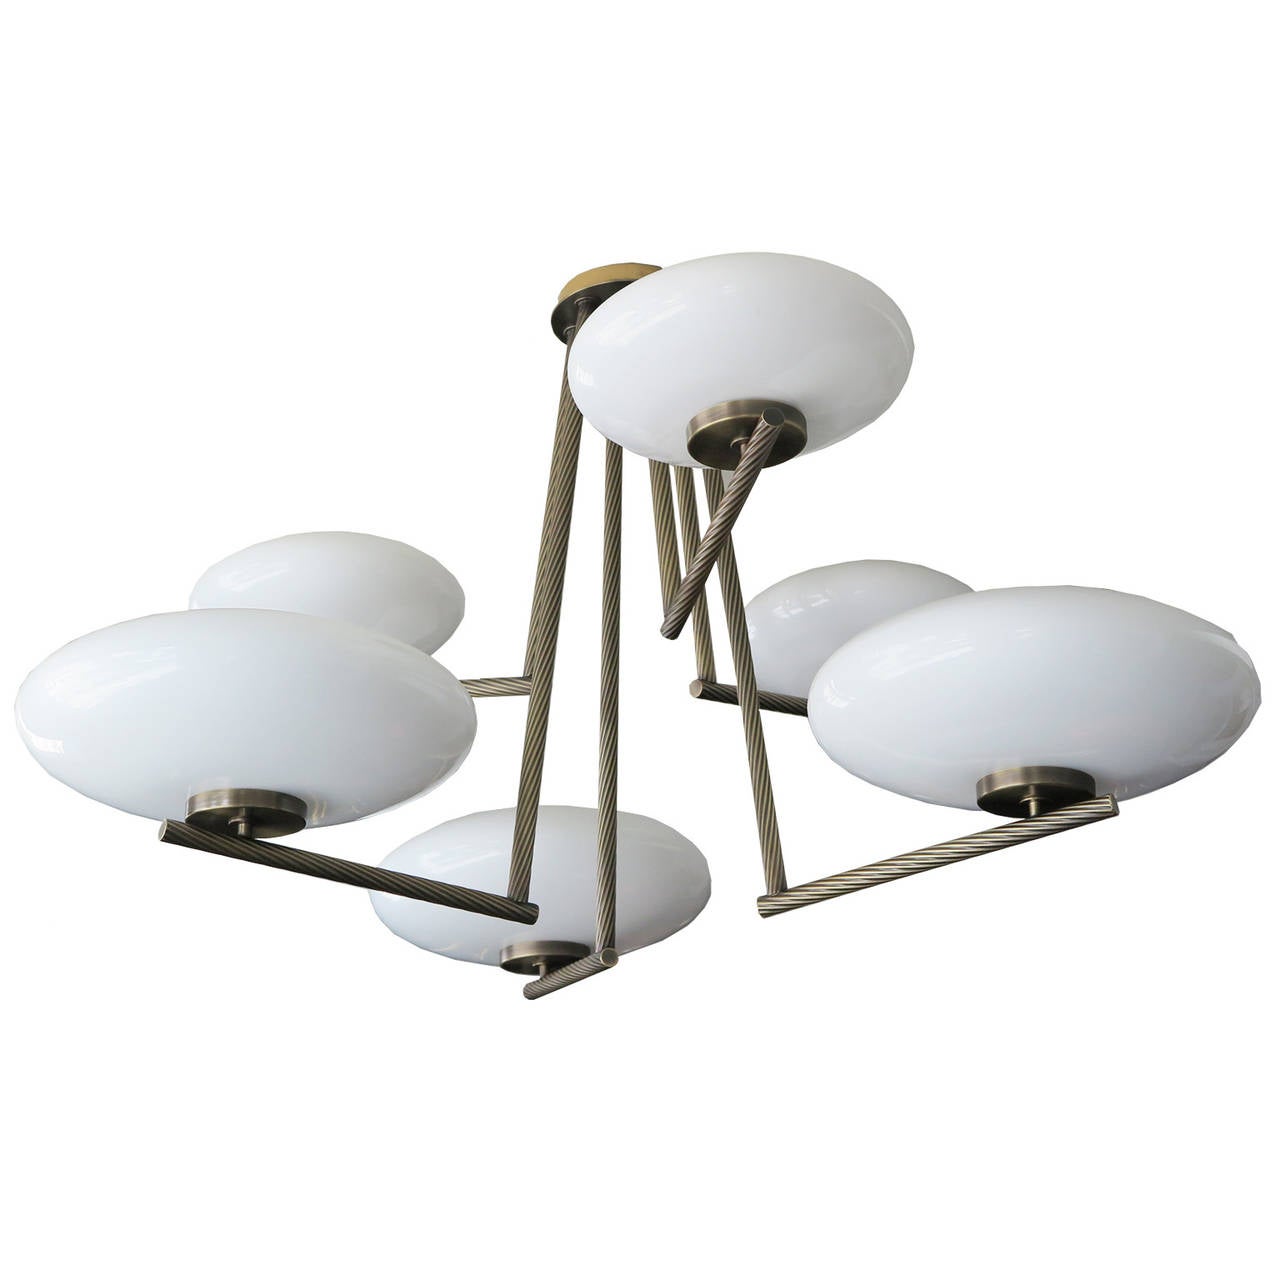 Unique six-arm chandelier with milk glass bowl shades. Antique brass frame features turned brass texture, France, 1960s.